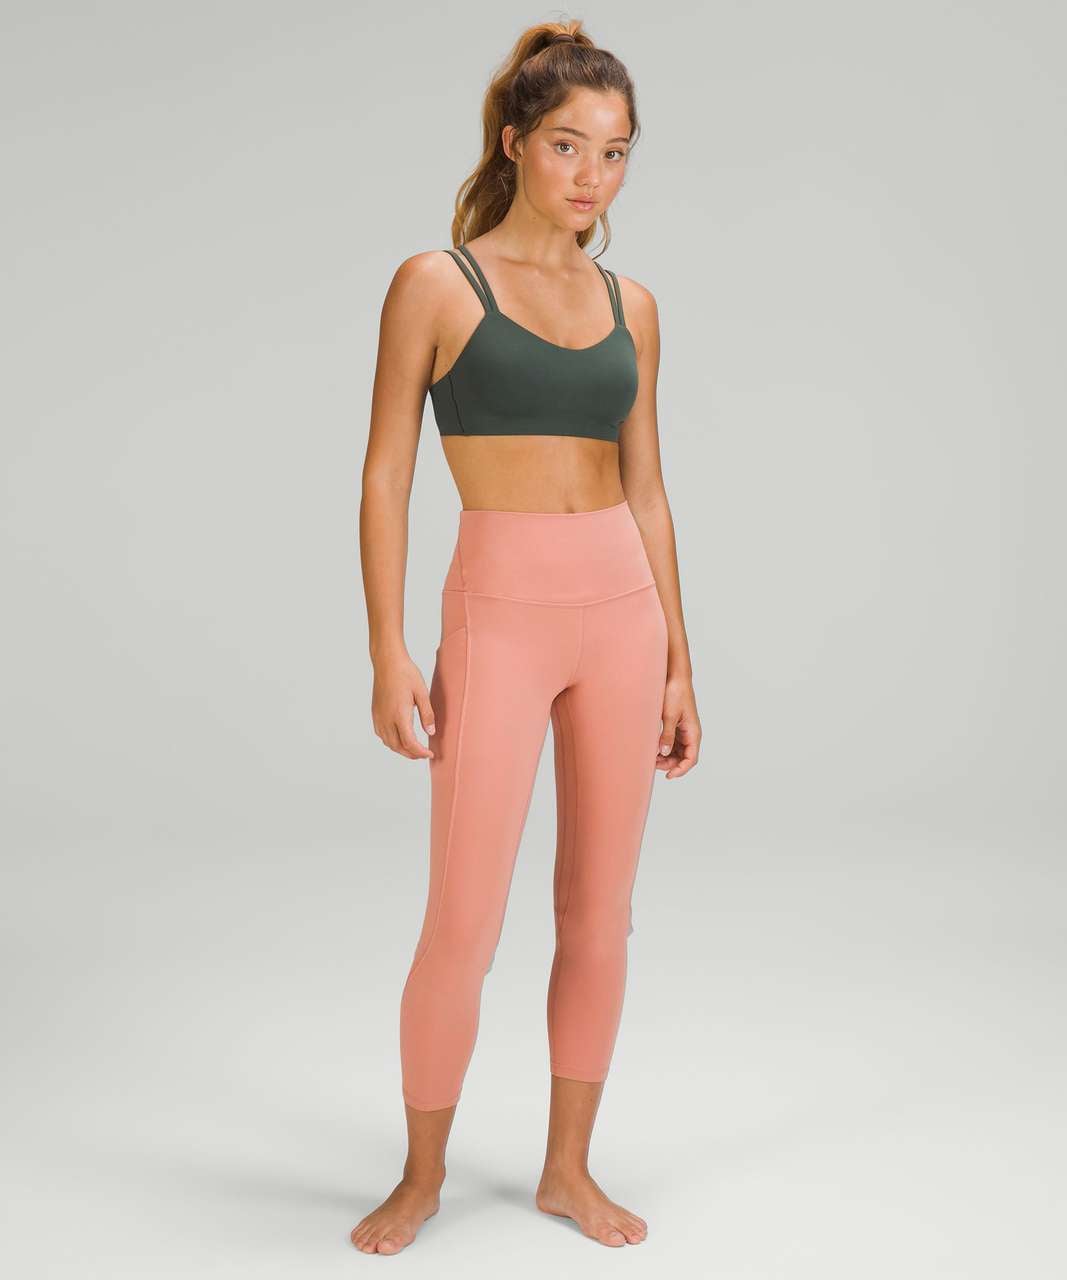 Shop Lululemon's latest sale drop, including these marked-doown jooggers